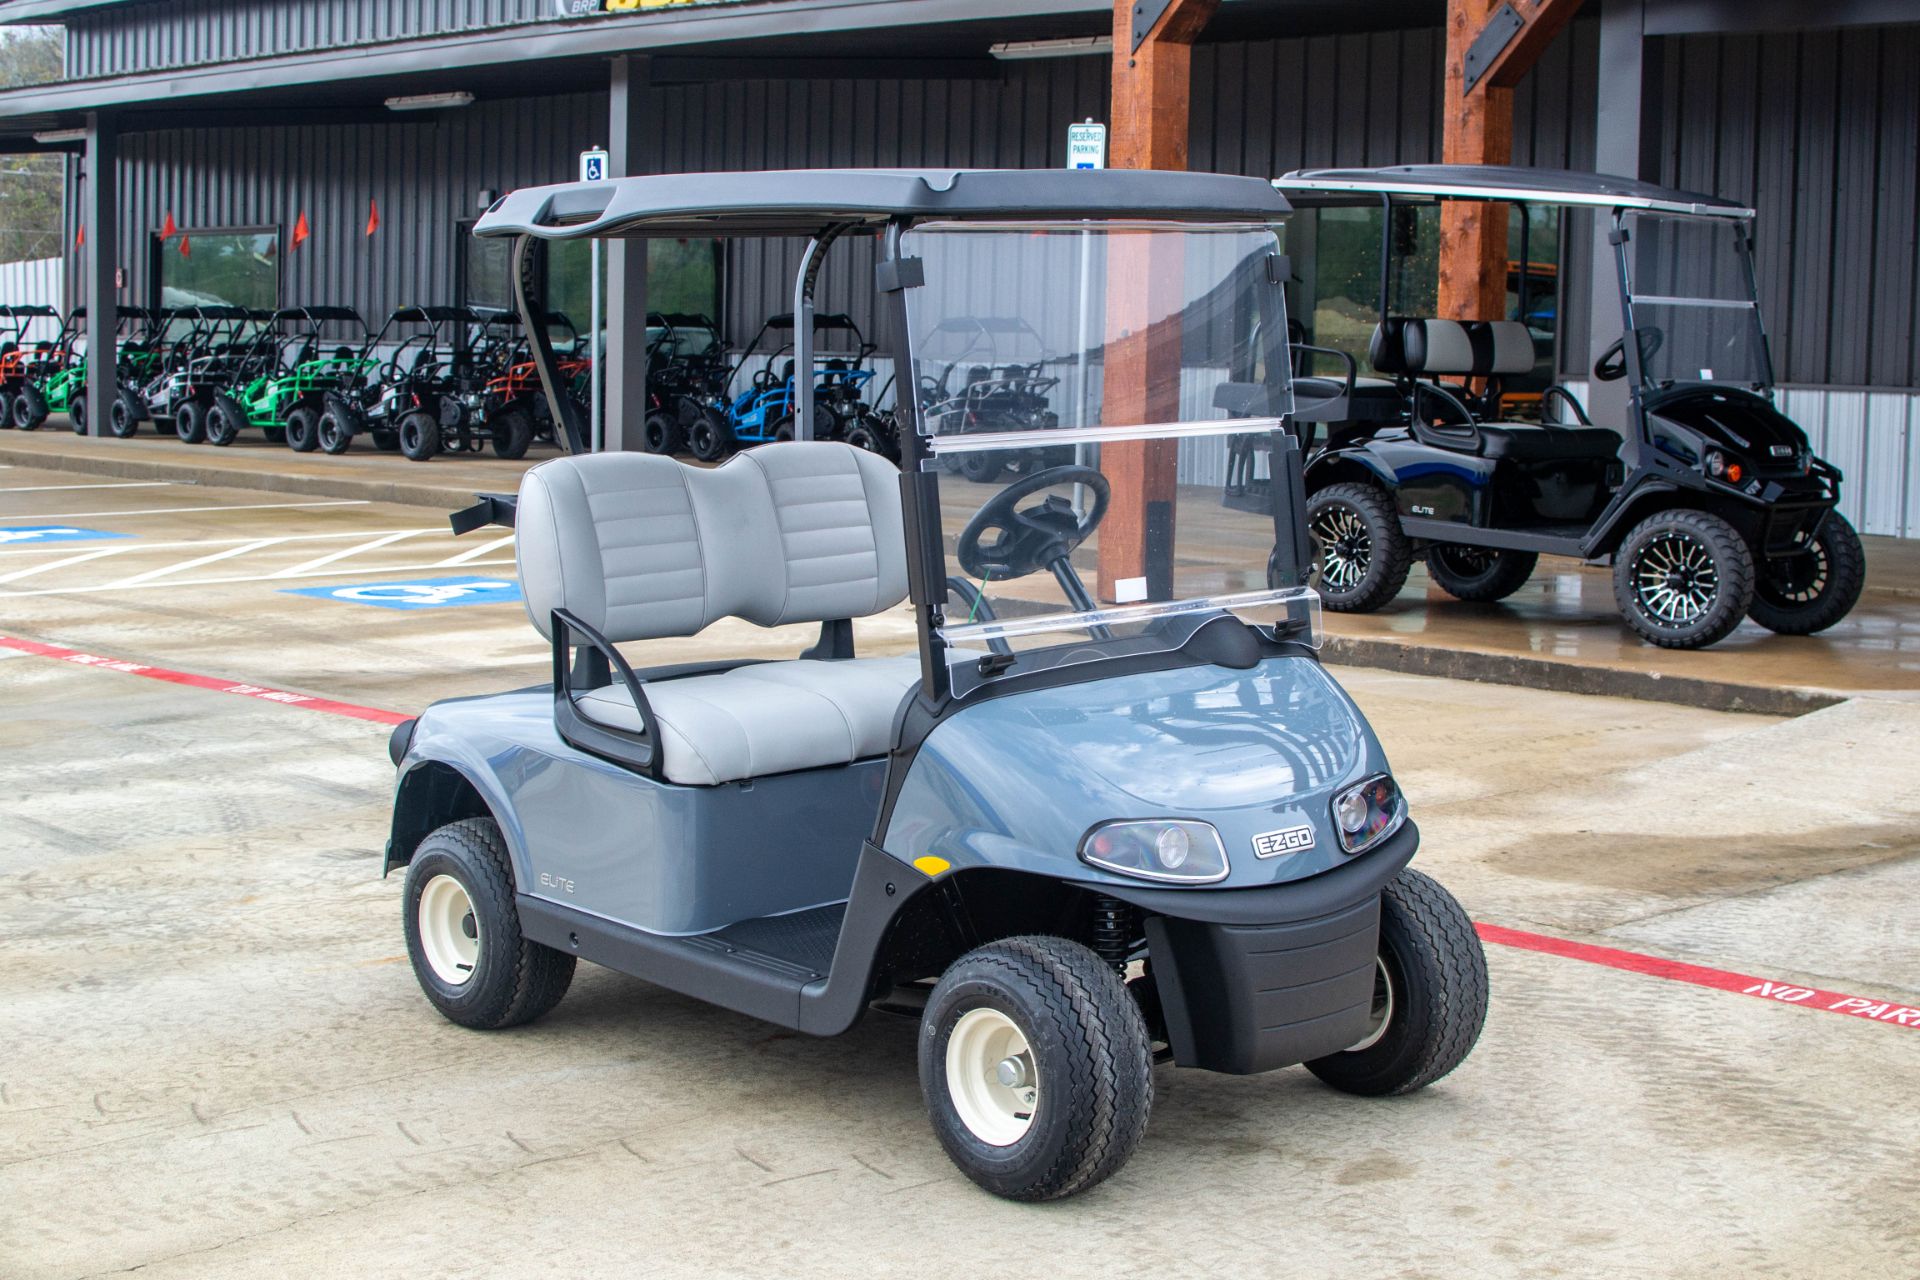 2023 E-Z-GO Freedom RXV ELiTE 2.2 Single Pack with Light World Charger in Huntsville, Texas - Photo 1